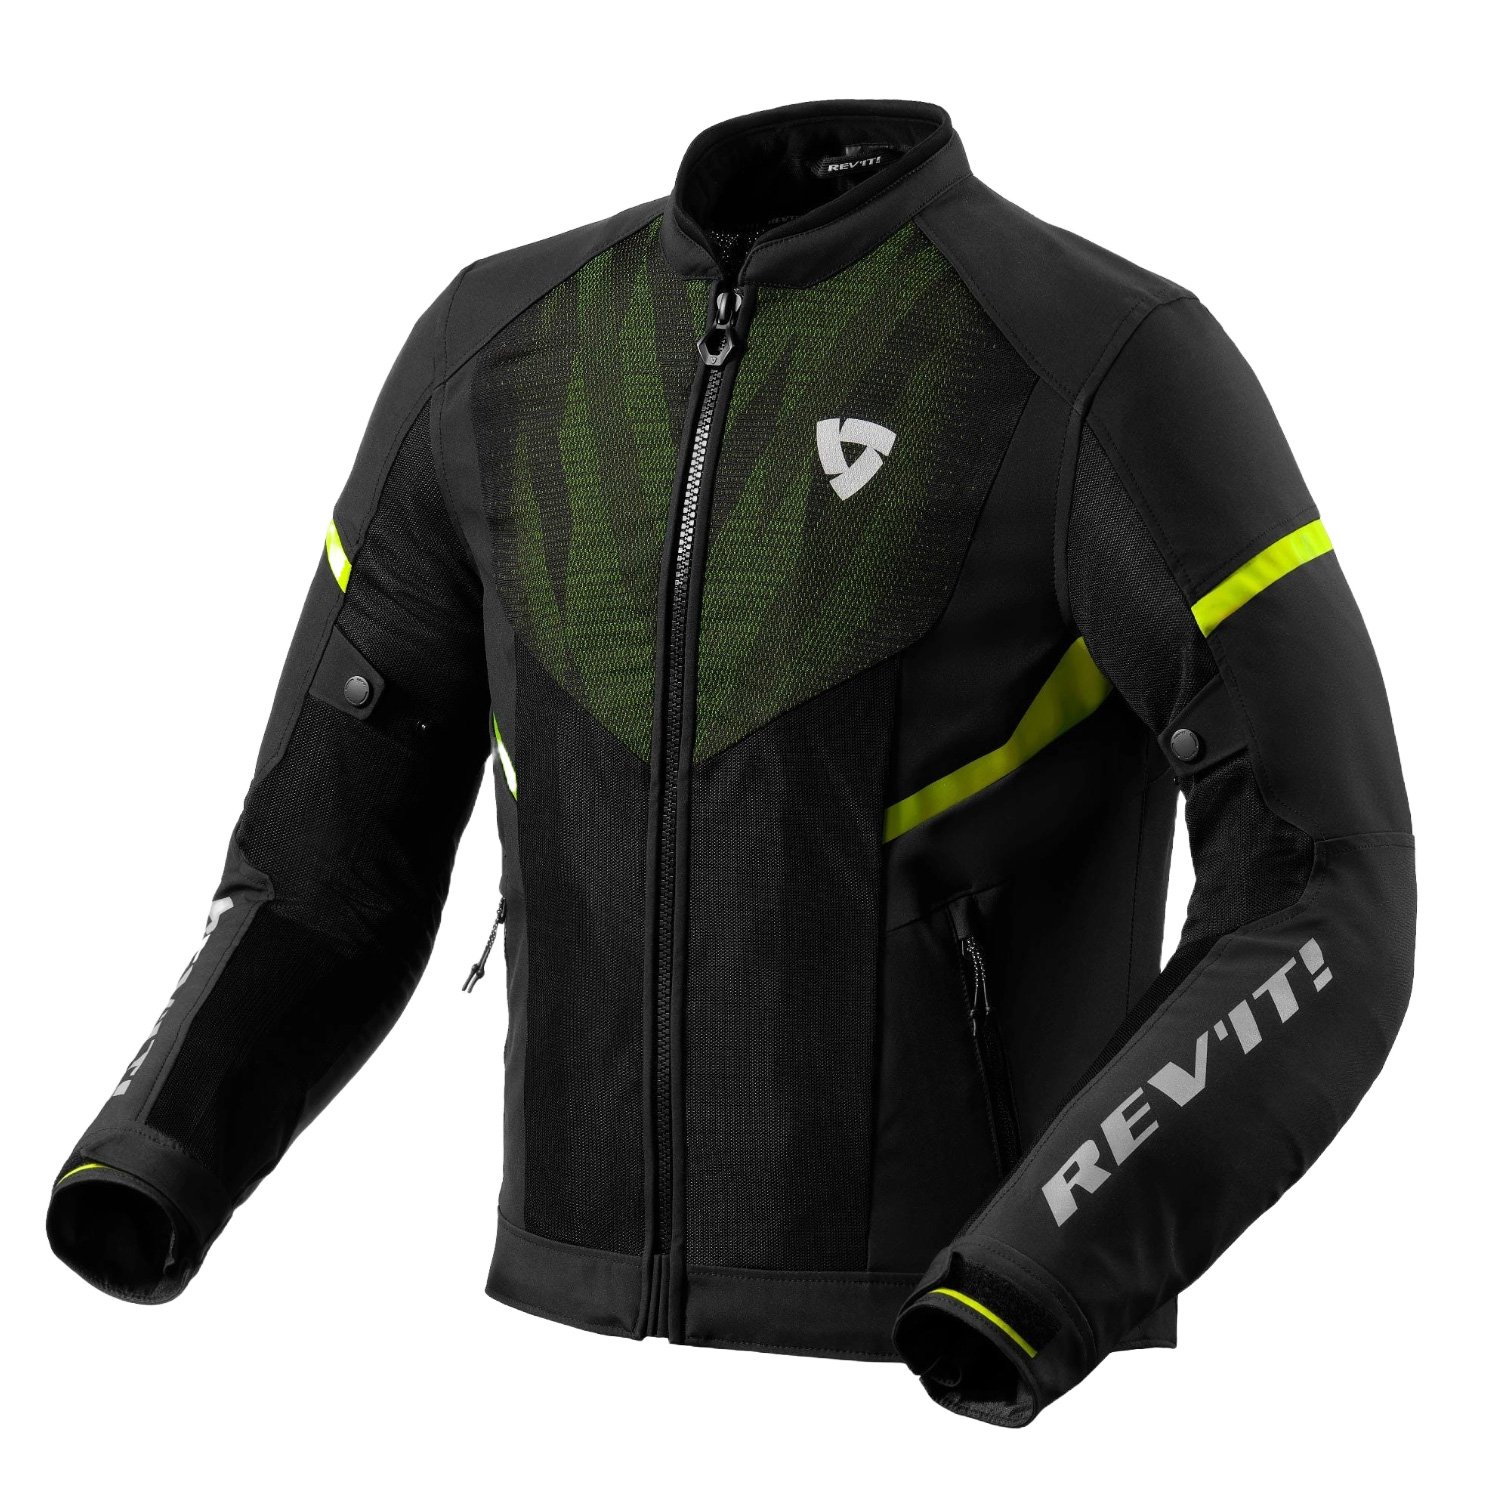 Image of REV'IT! Hyperspeed 2 GT Air Jacket Black Neon Yellow Talla L